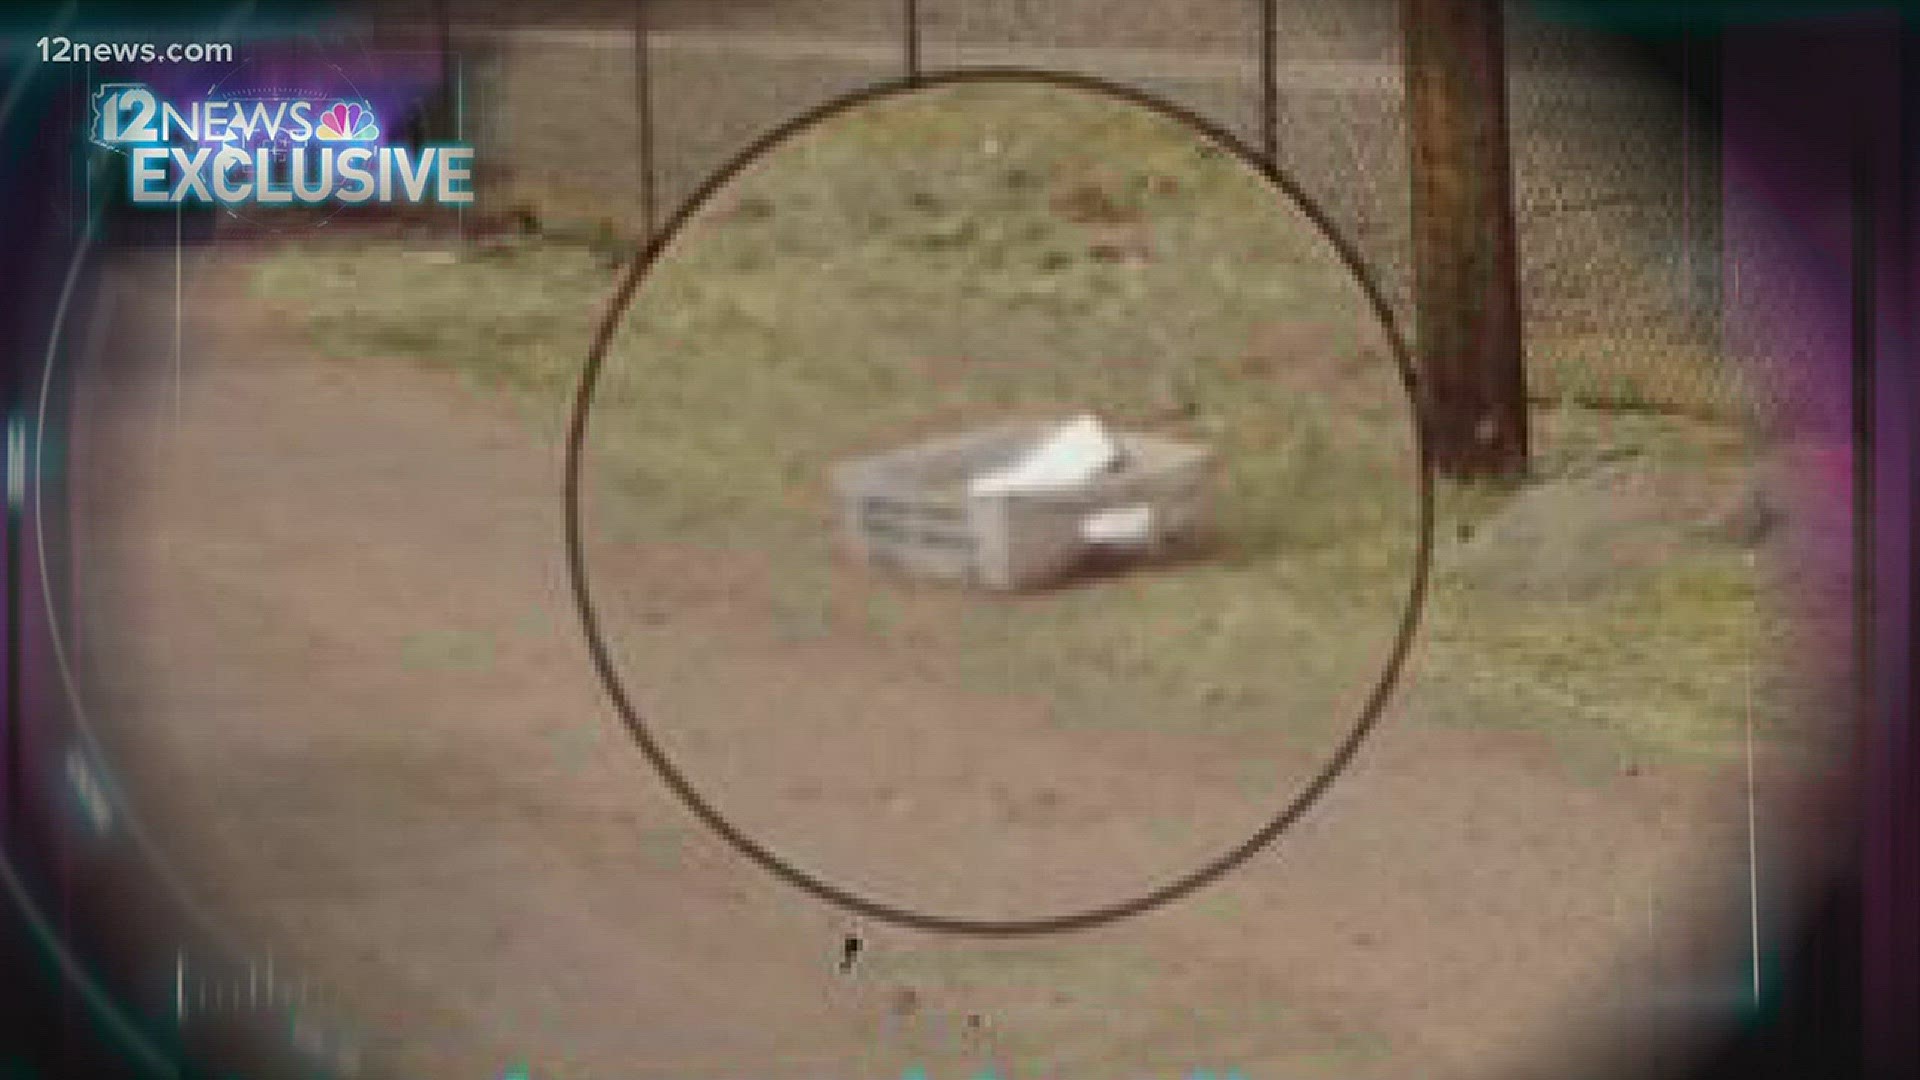 The USPS is investigating how a mail bin was found dumped in an alley in Phoenix.